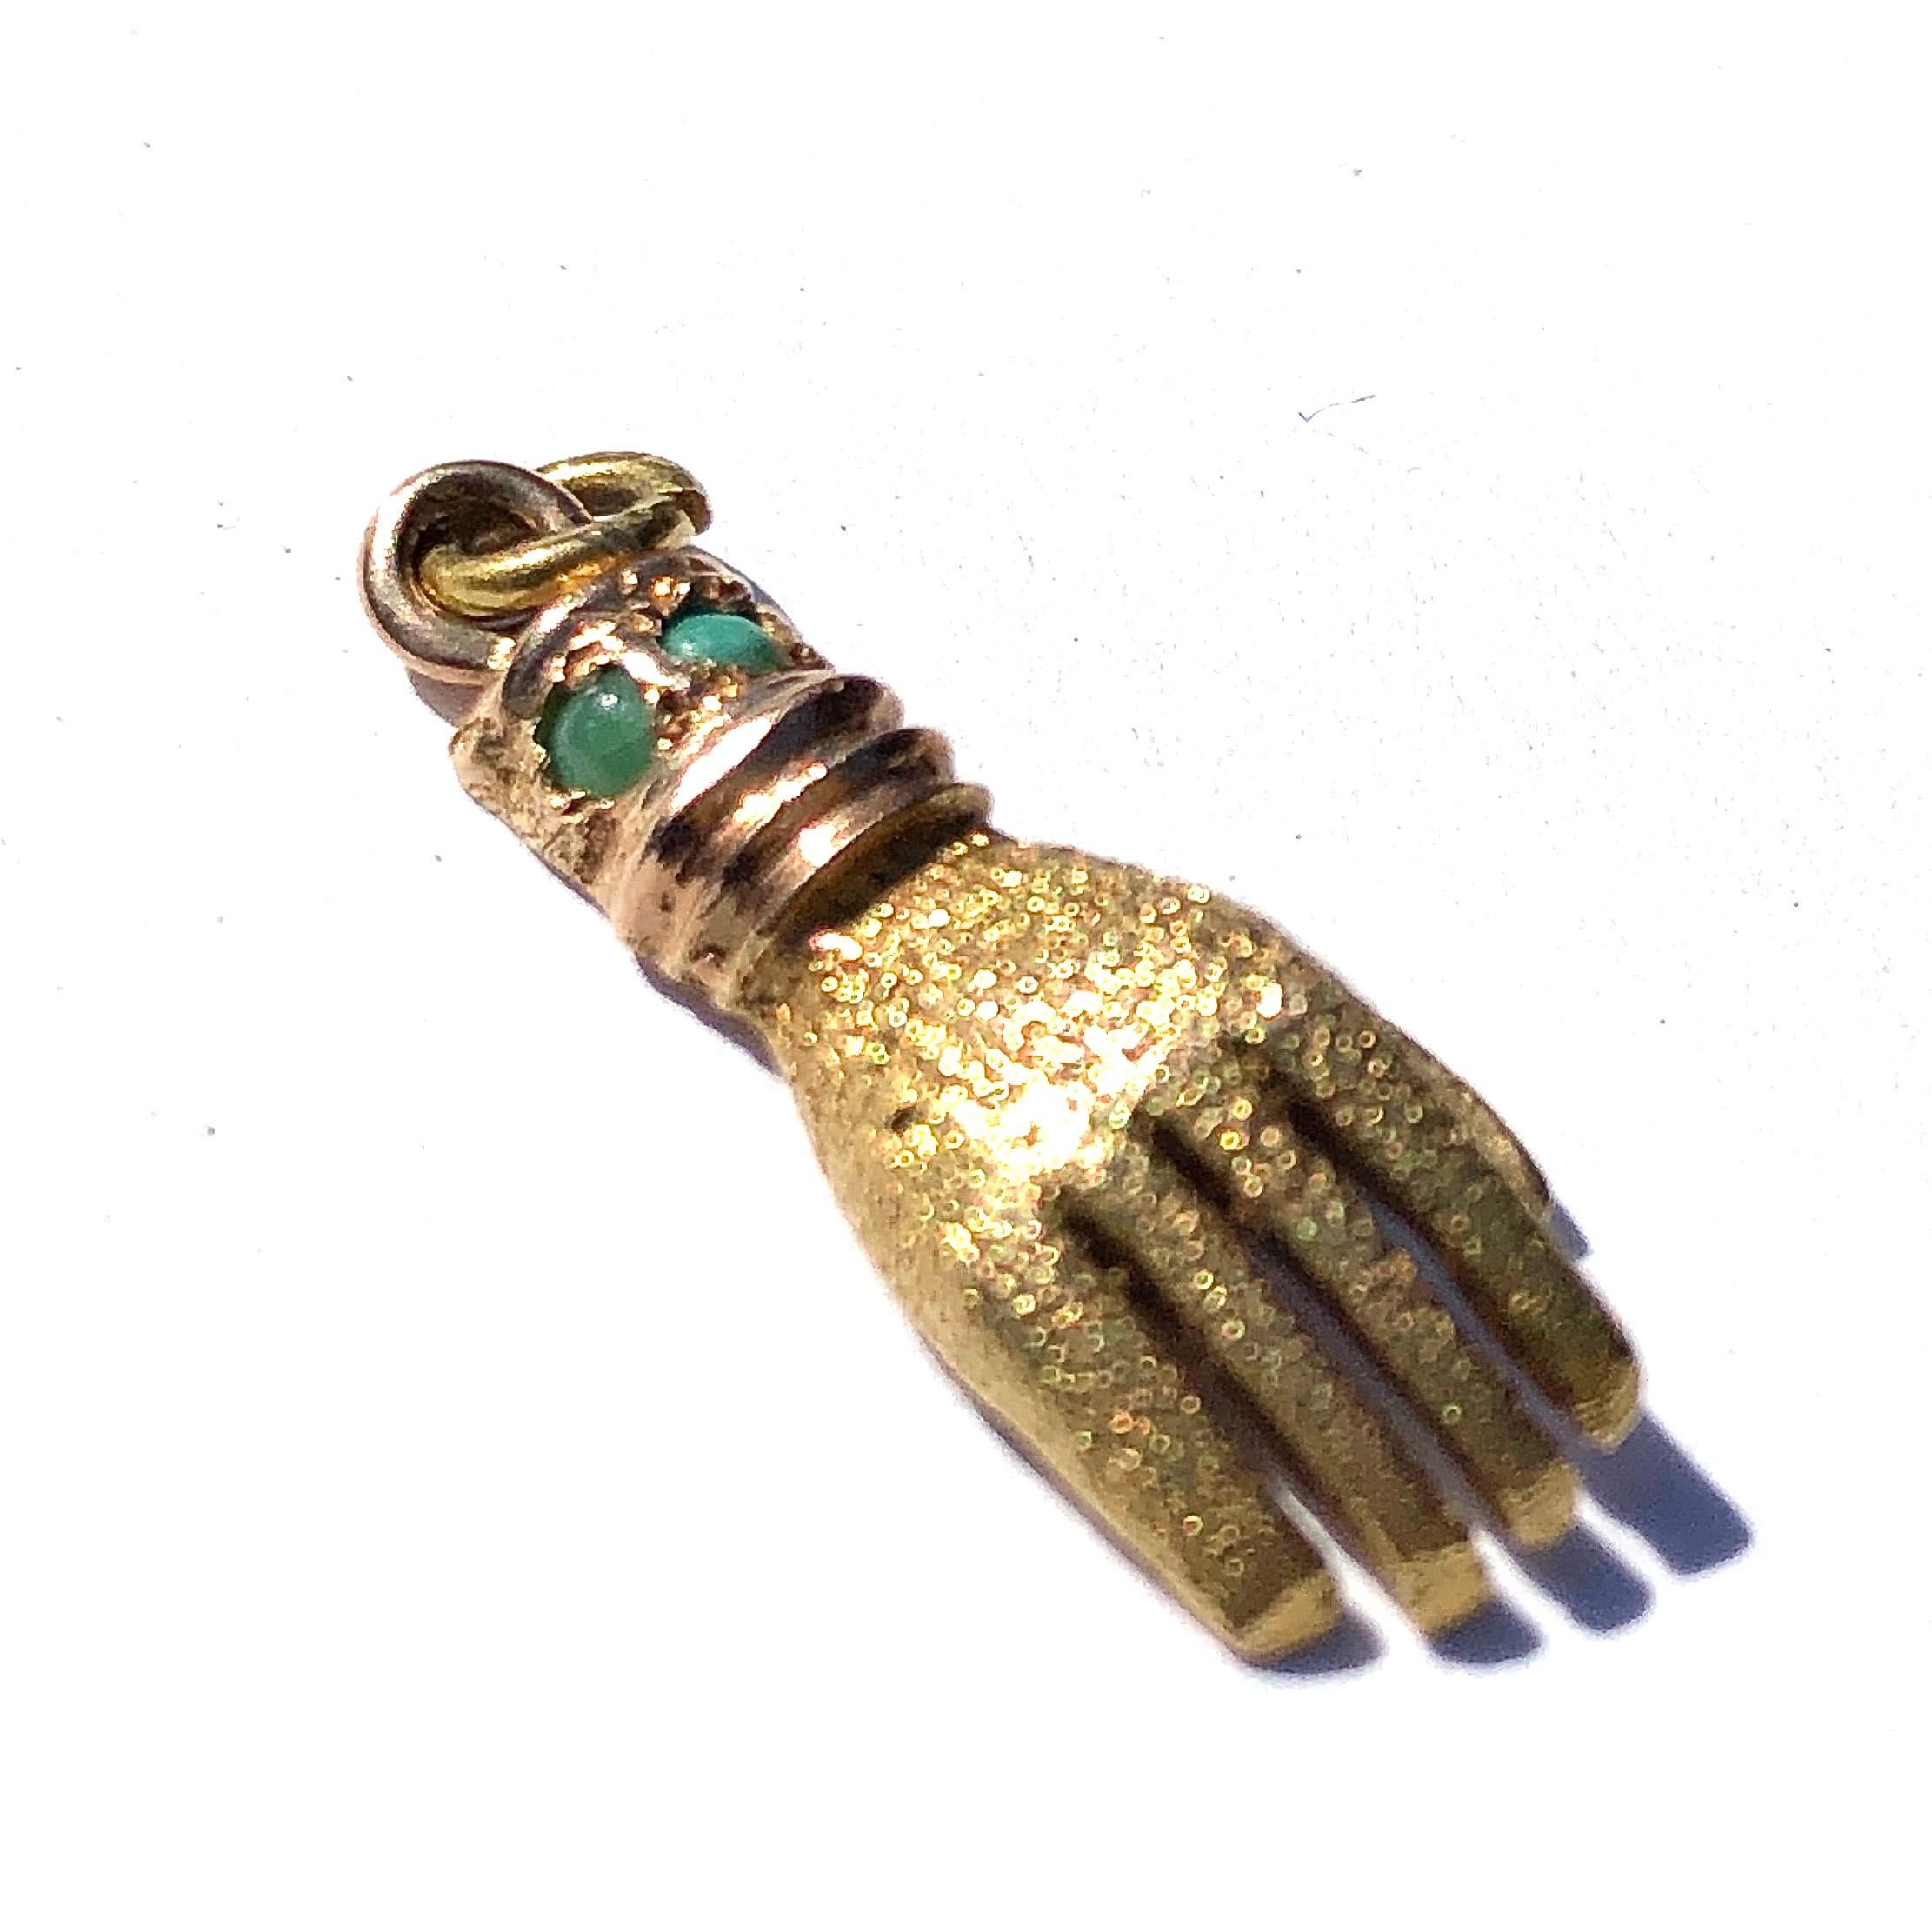 This gorgeous charm is modelled in 15ct gold and around the wrist of this hand are small turquoise stones. The hand itself is textured and the underside and from the wrist, the detail is smooth and glossy.

Widest Side: 2.2cm

Weight: 1.7g